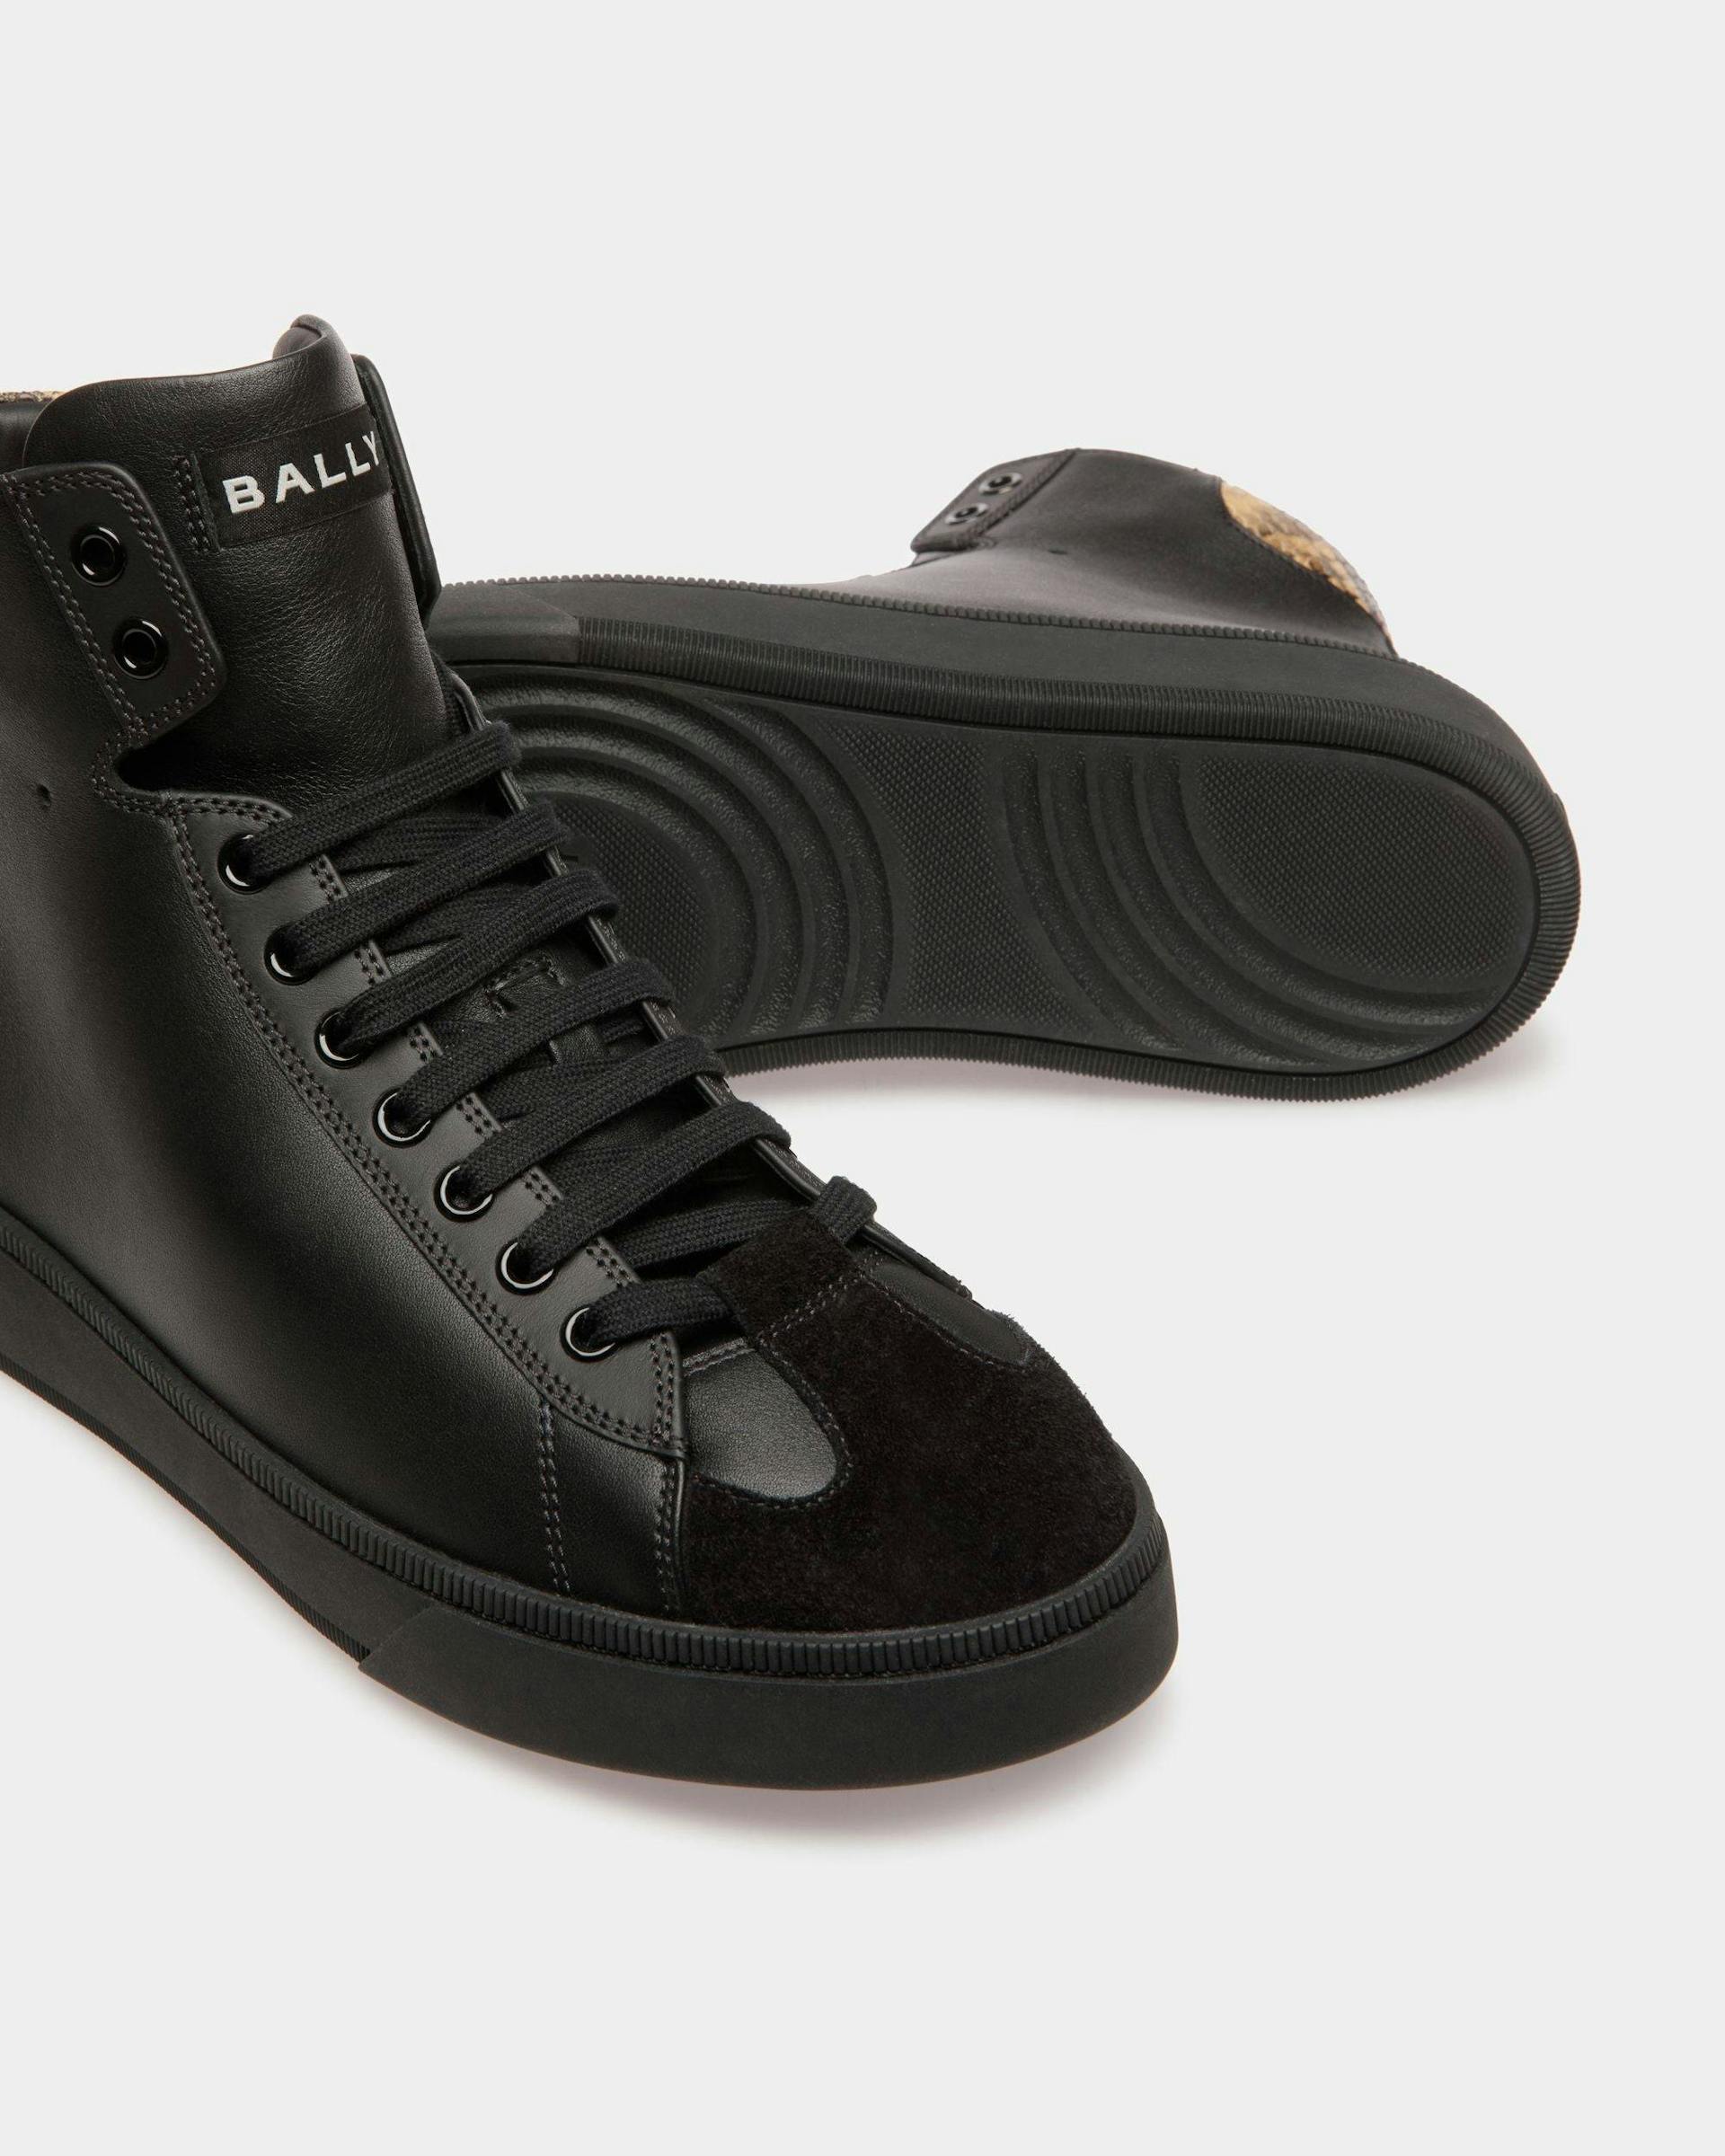 Raise Sneakers In Black And Python Print Leather - Men's - Bally - 05